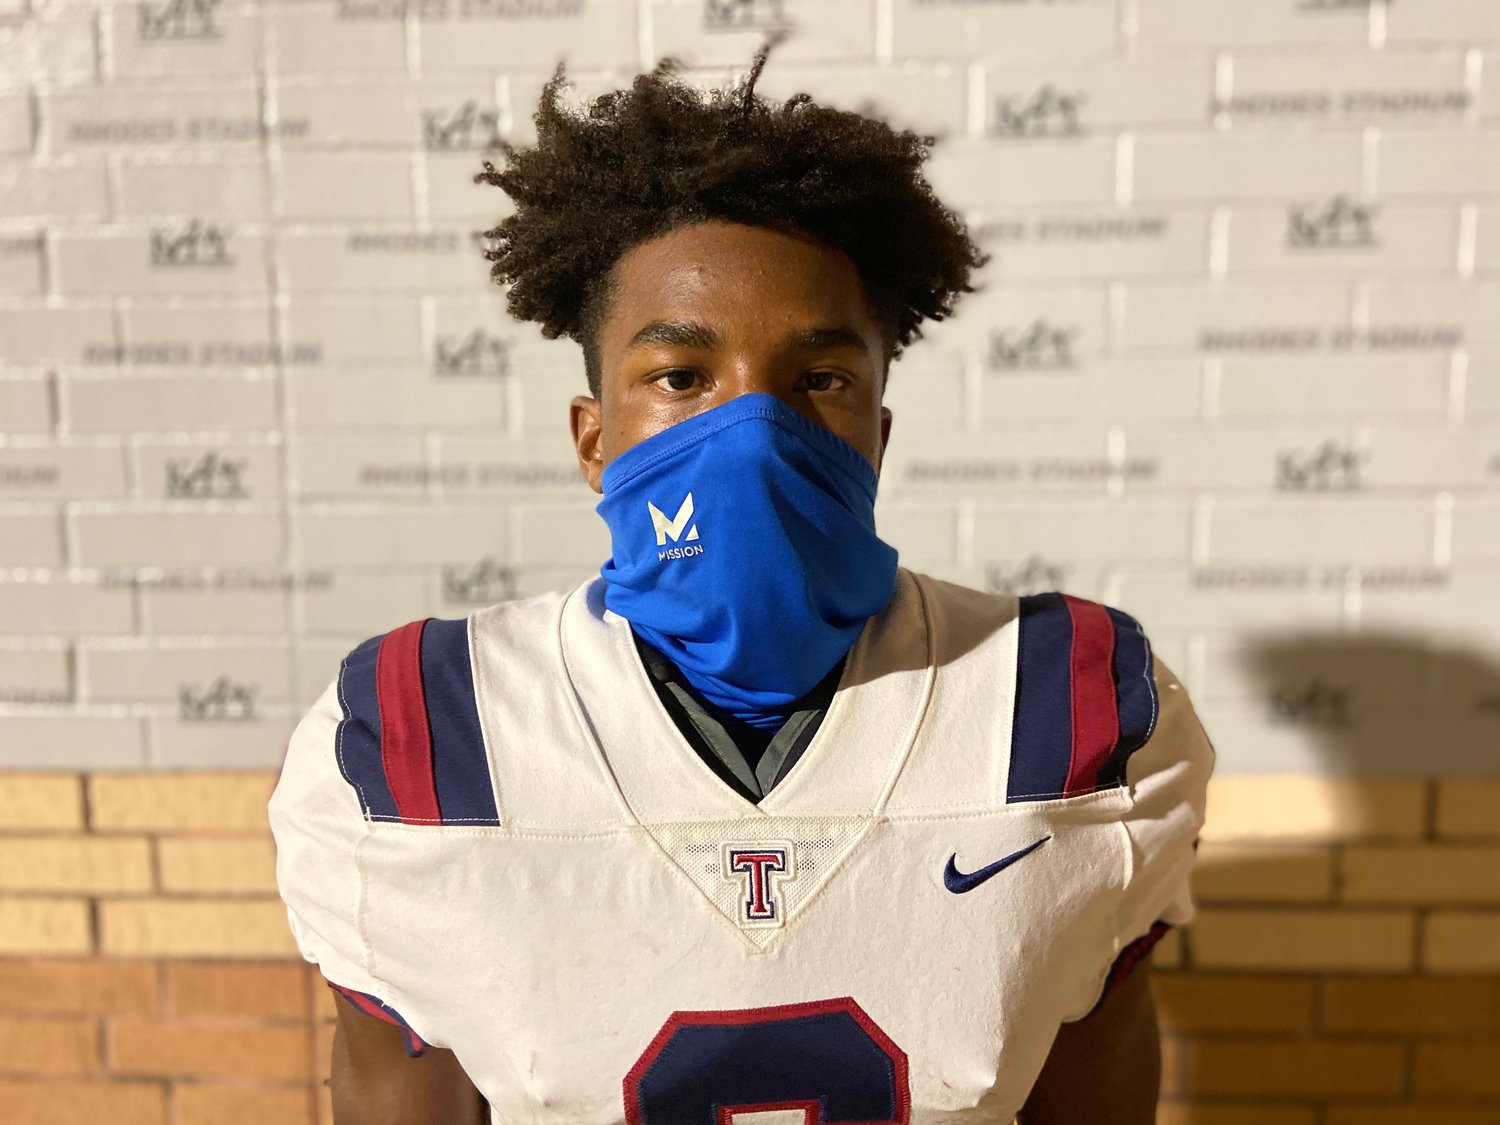 Tompkins senior running back Marquis Shoulders rushed for 184 yards and two touchdowns on nine carries in a 28-0 win over Taylor on Oct. 23 at Rhodes Stadium.